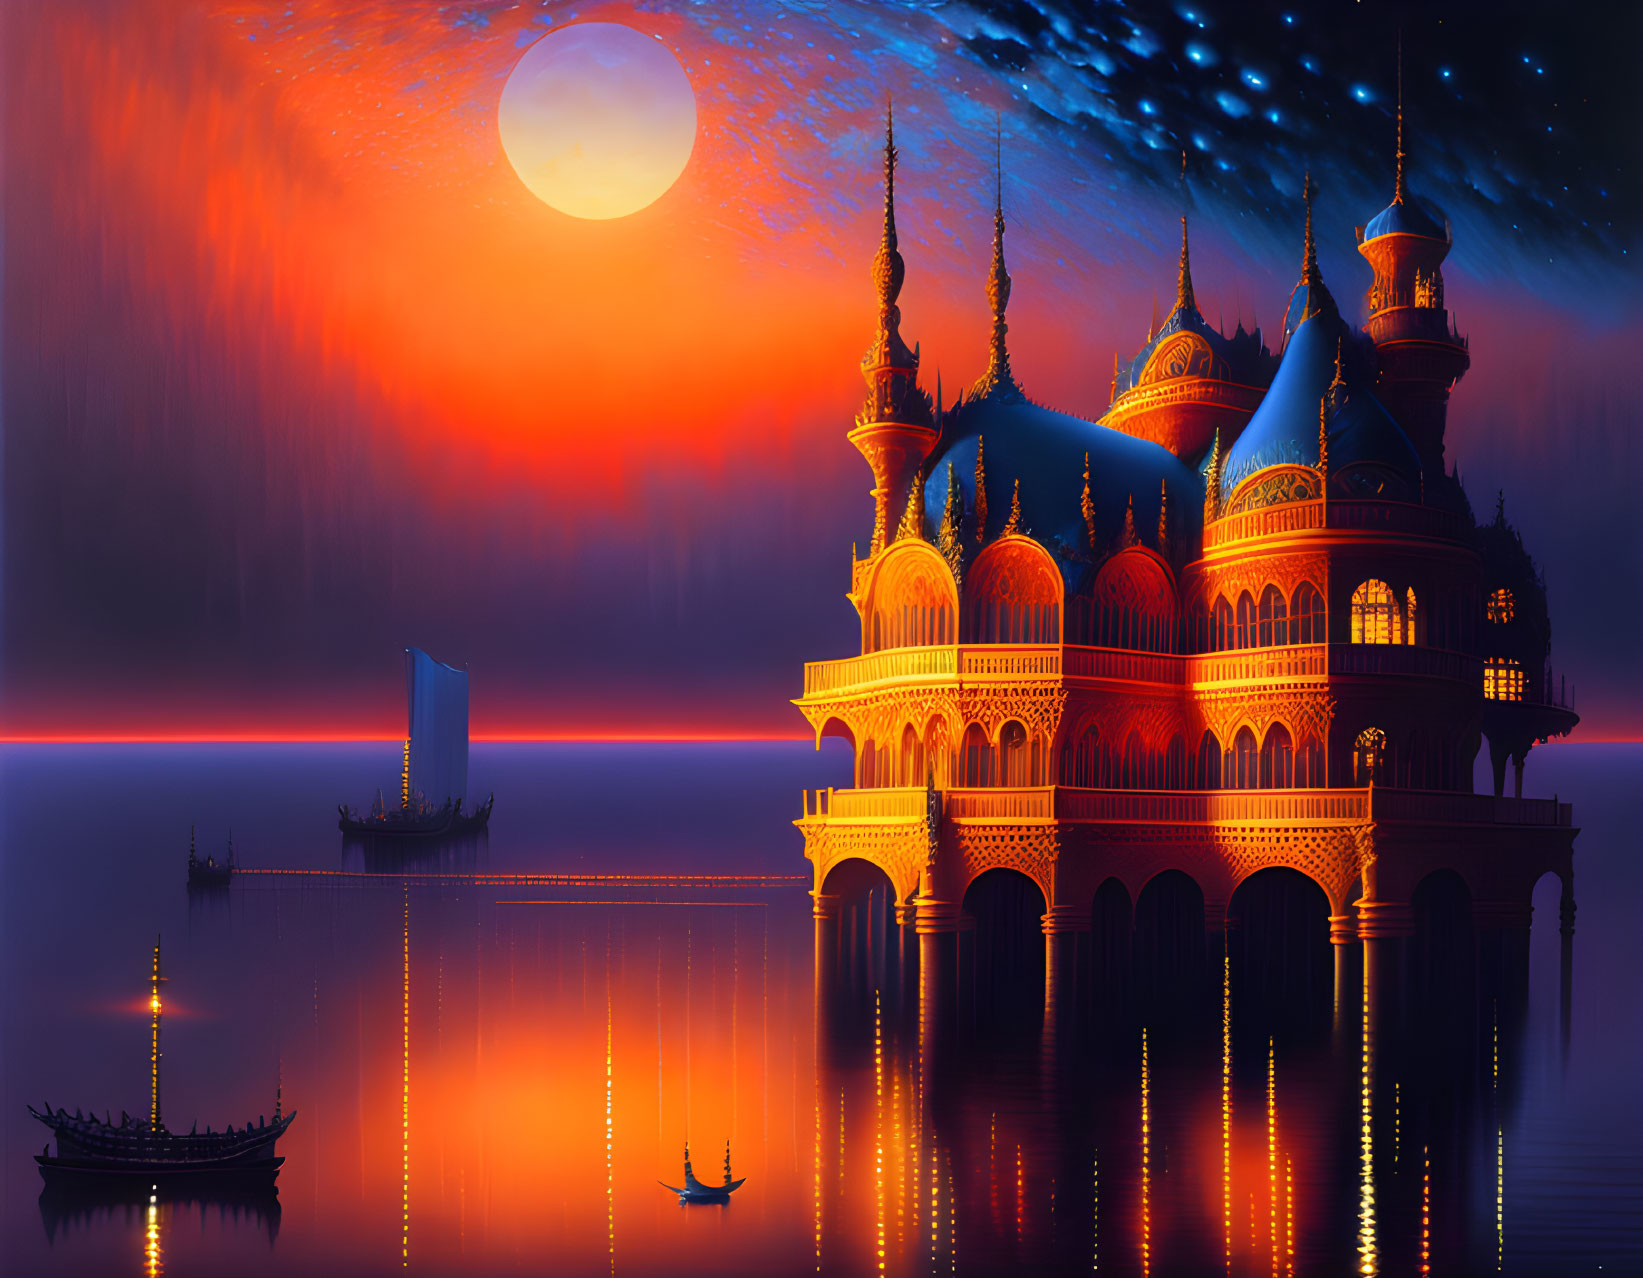 Ethereal palace with intricate spires under radiant moon by tranquil sea